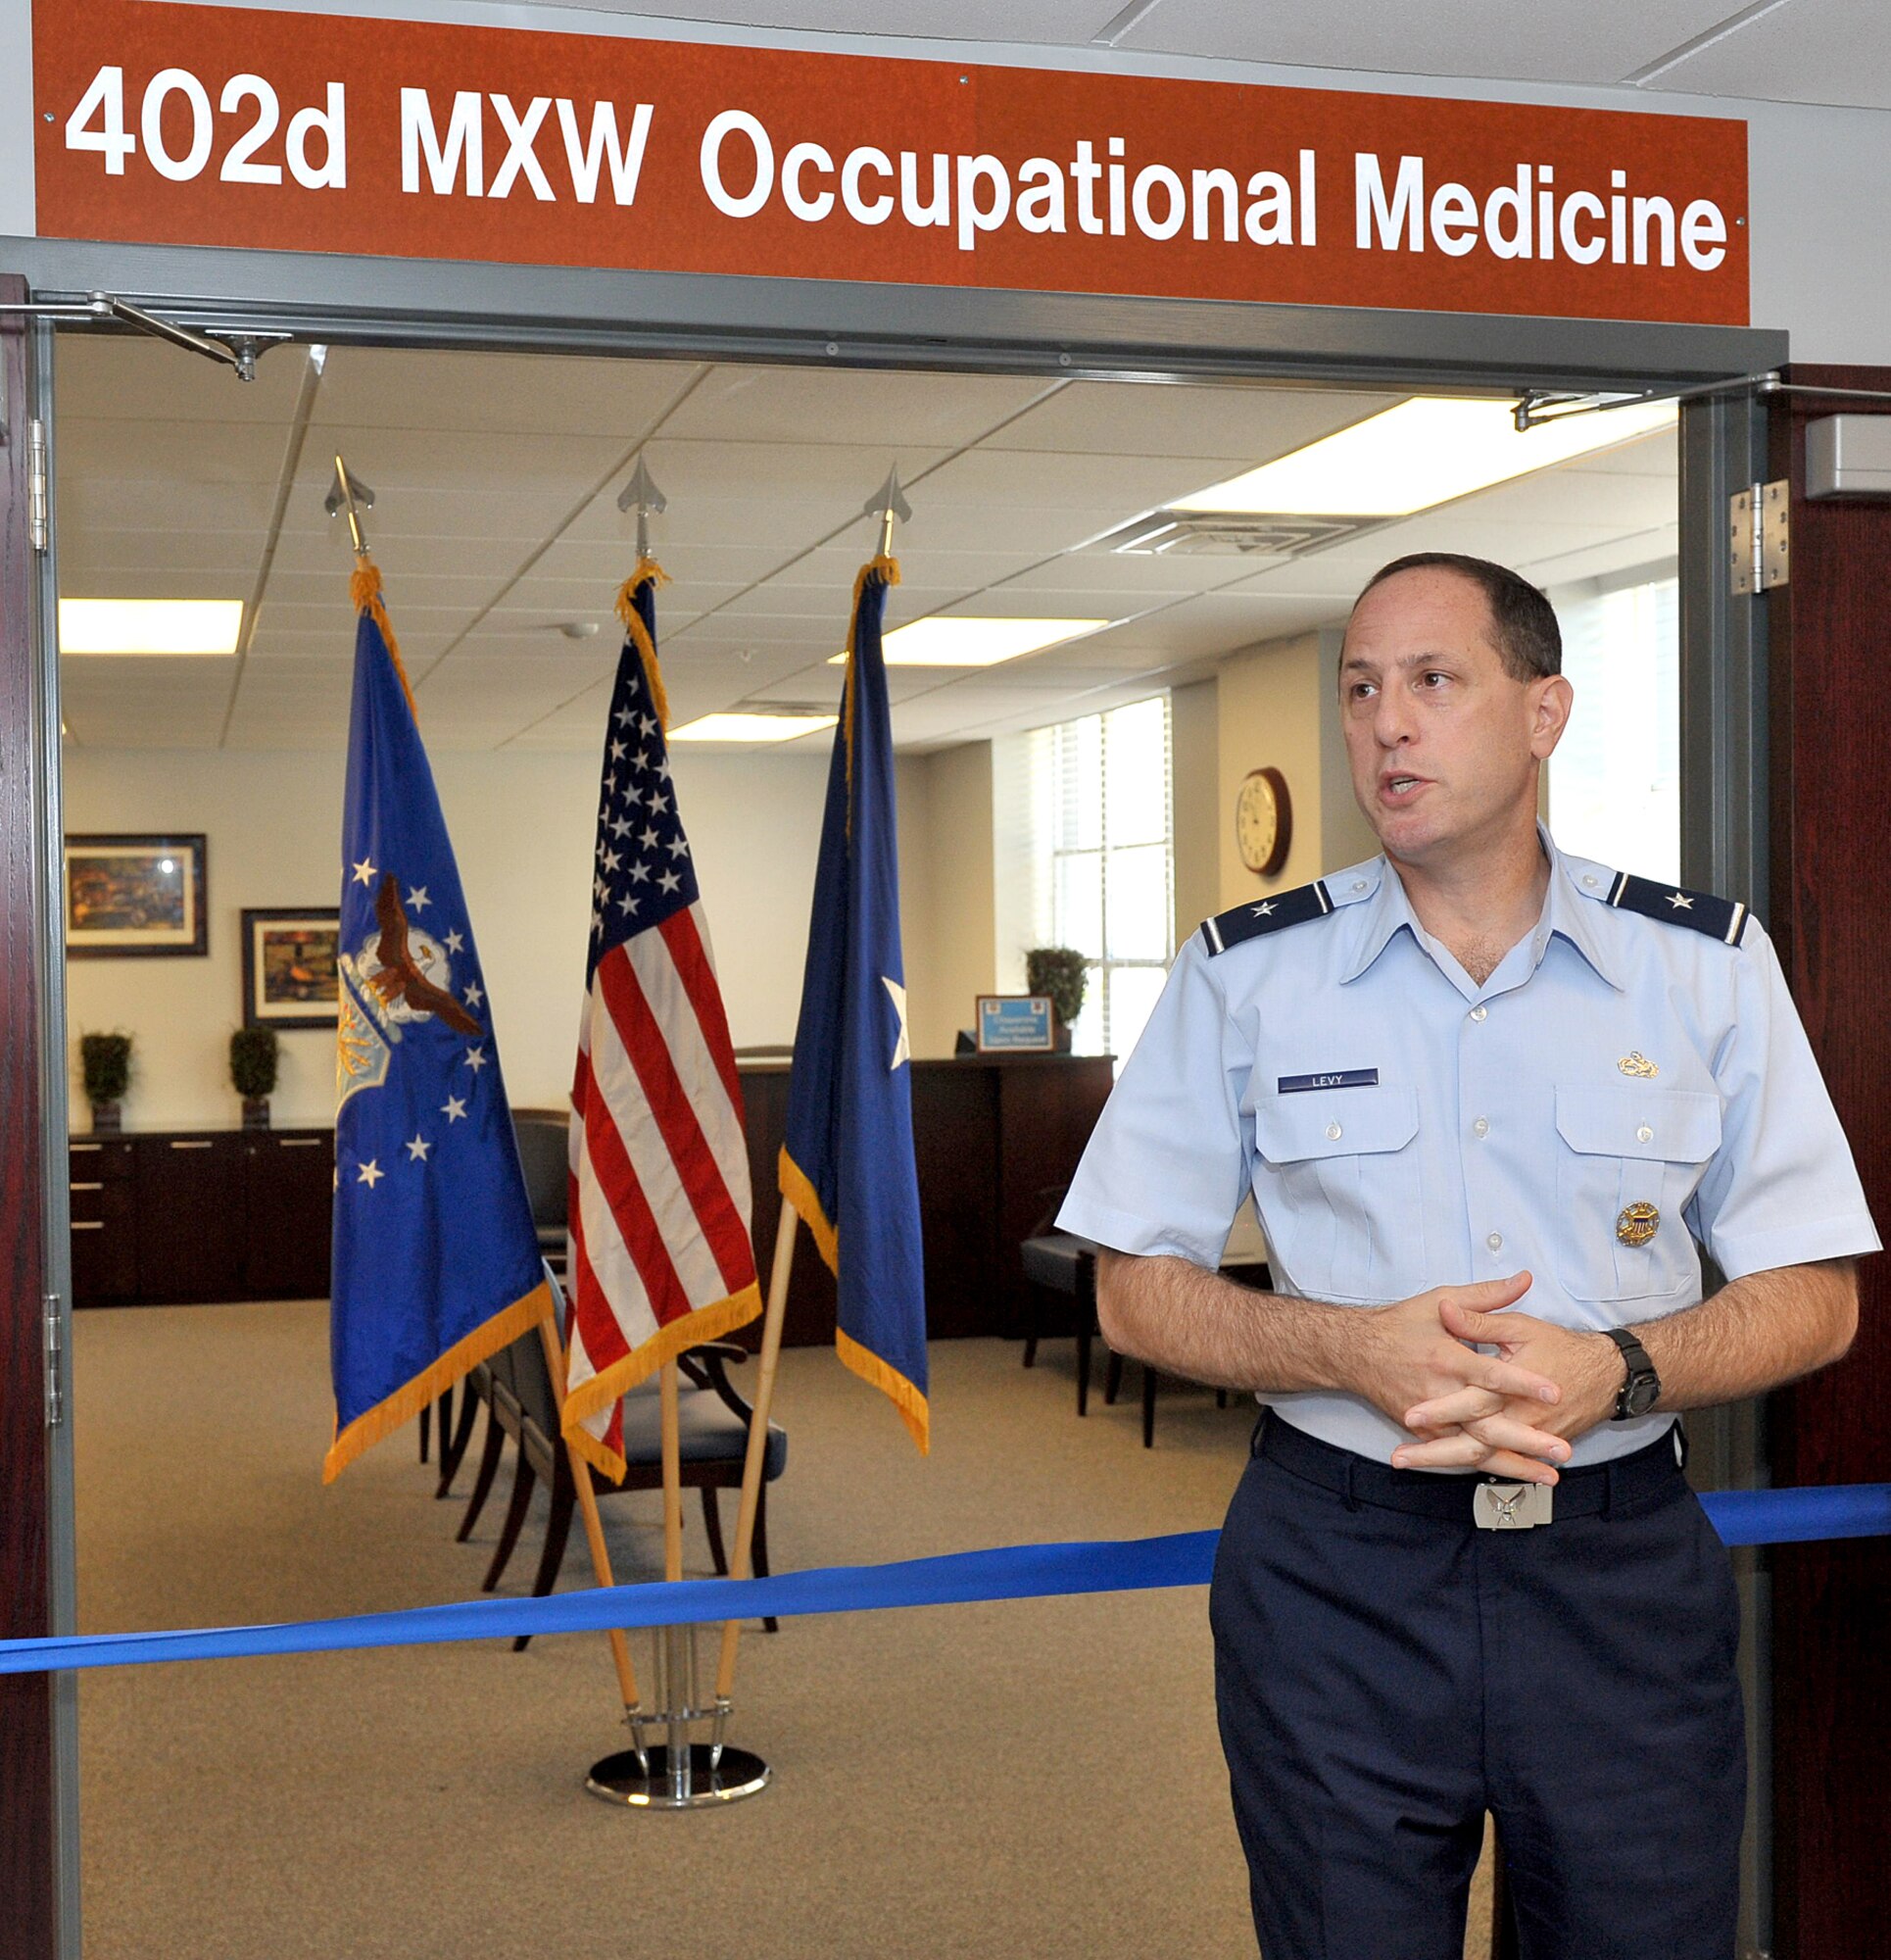 Brig. Gen. Lee Levy, 402nd Maintenance Wing commander, presides over a ribbon cutting ceremony Monday for the new occupational medicine facility. in Bldg. 155.  U.S. Air Force photo by Tommie Horton